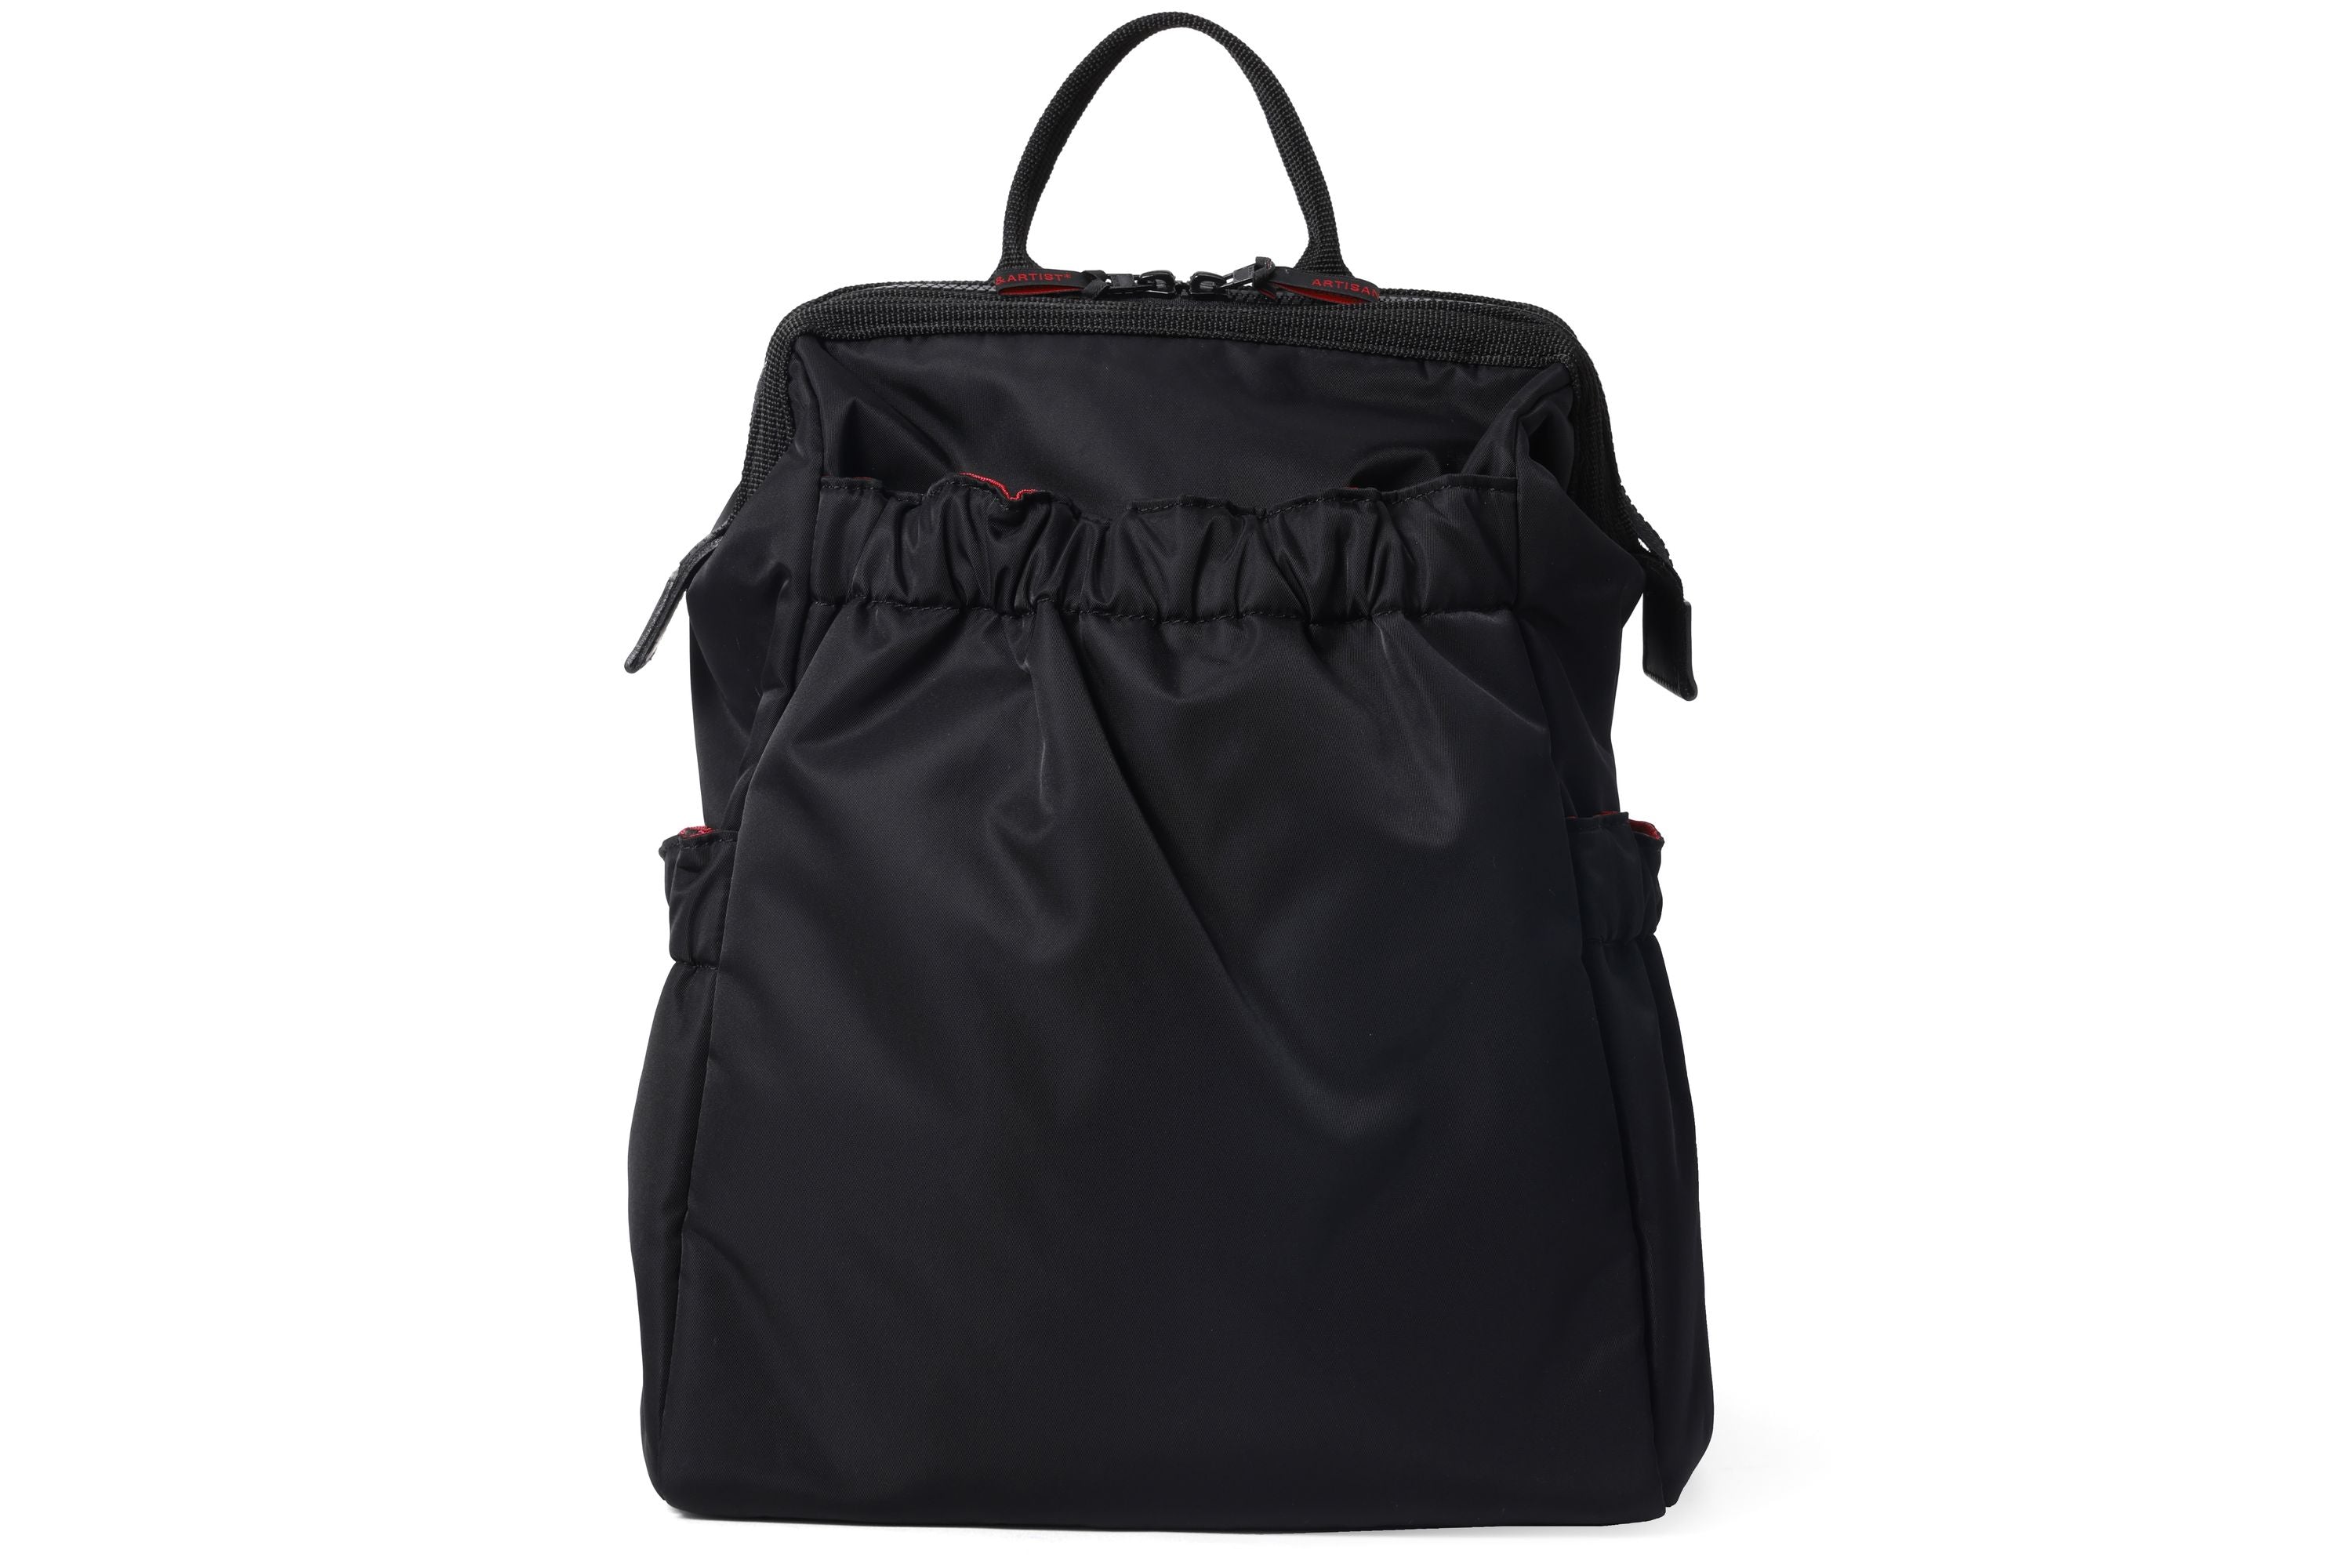 Classic - Clasp Opening Large Backpack - KG2-704